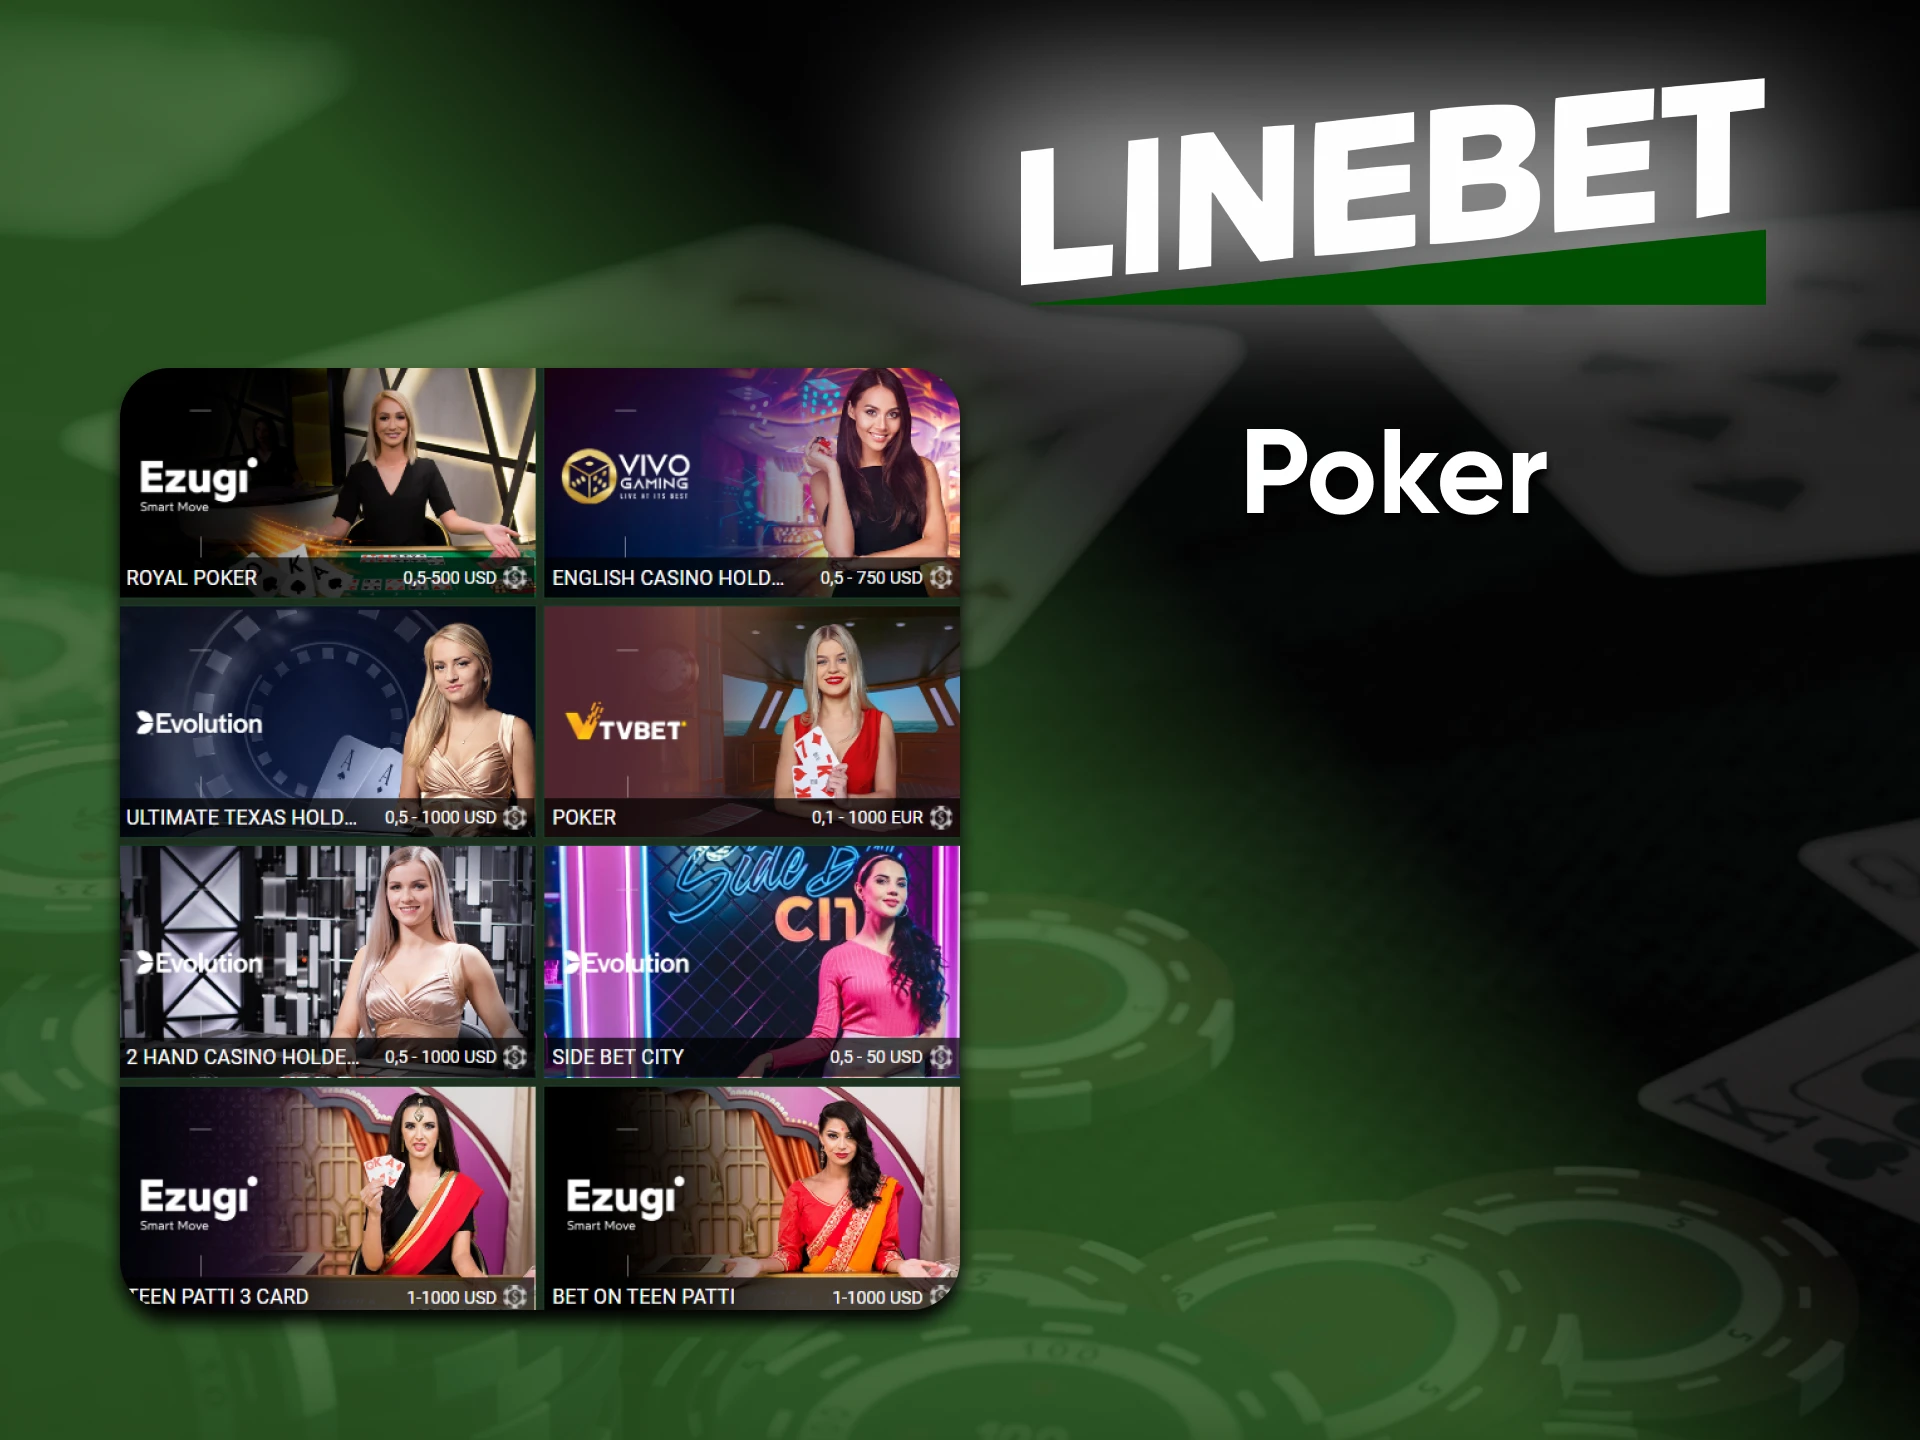 At Linebet casino you can play Poker.